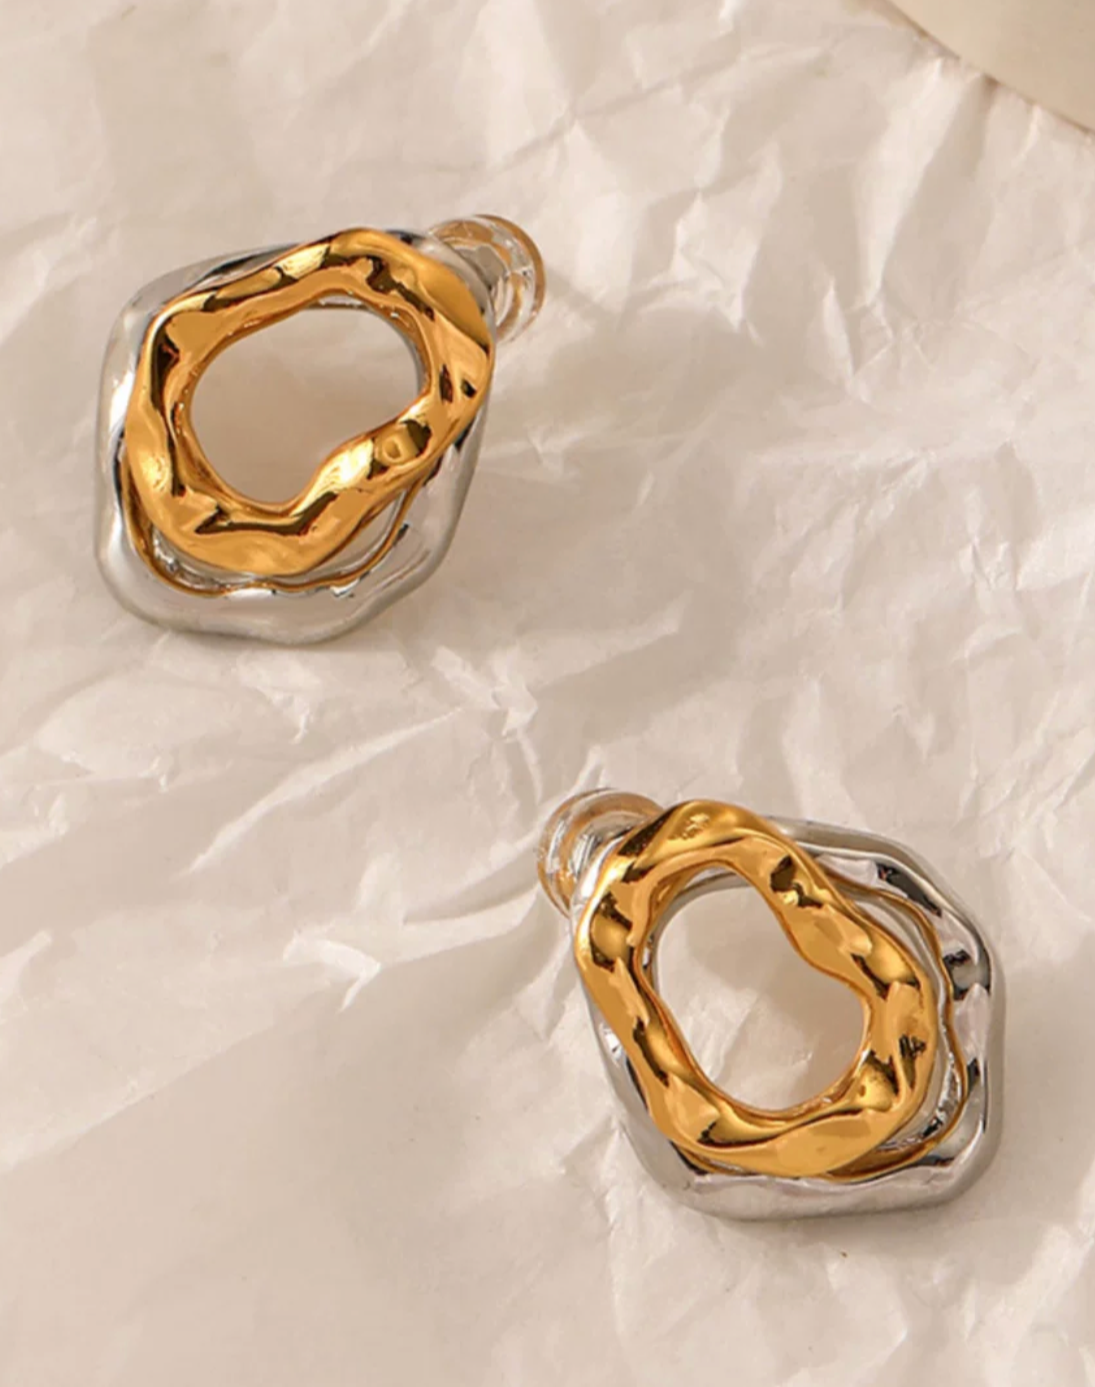 Contrast Gold and Silver Designer Earrings